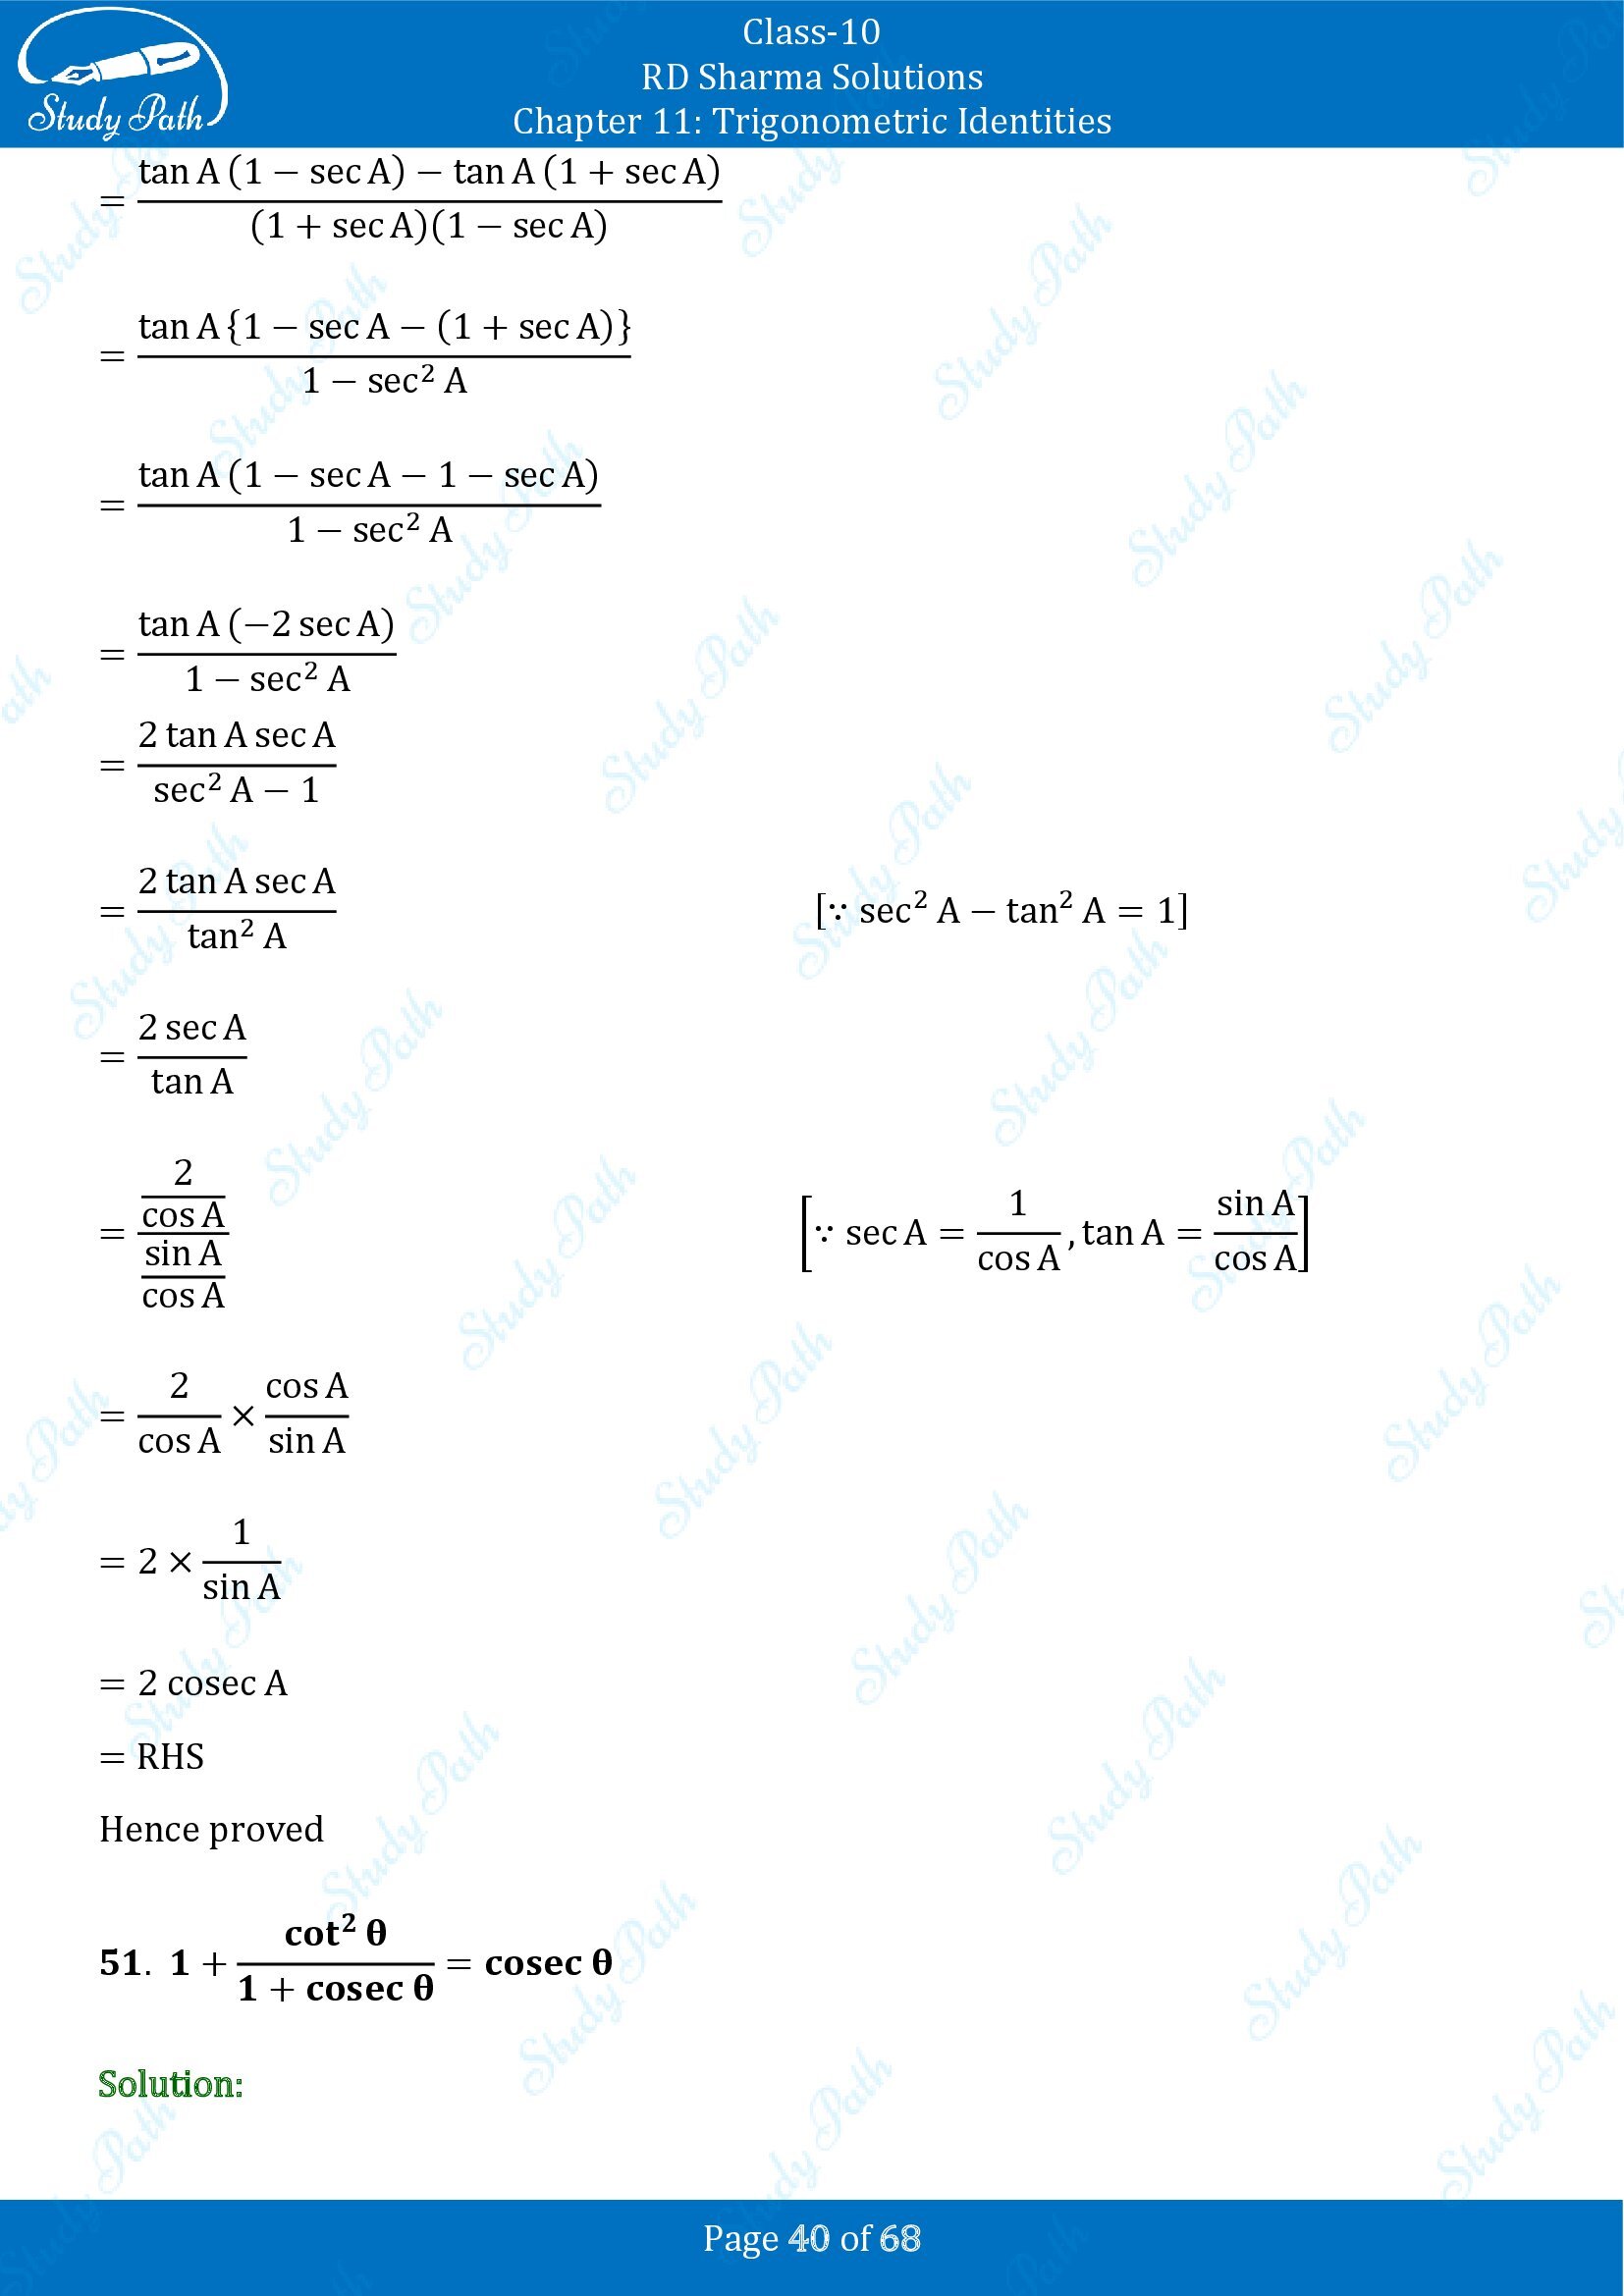 RD Sharma Solutions Class 10 Chapter 11 Trigonometric Identities Exercise 11.1 00040